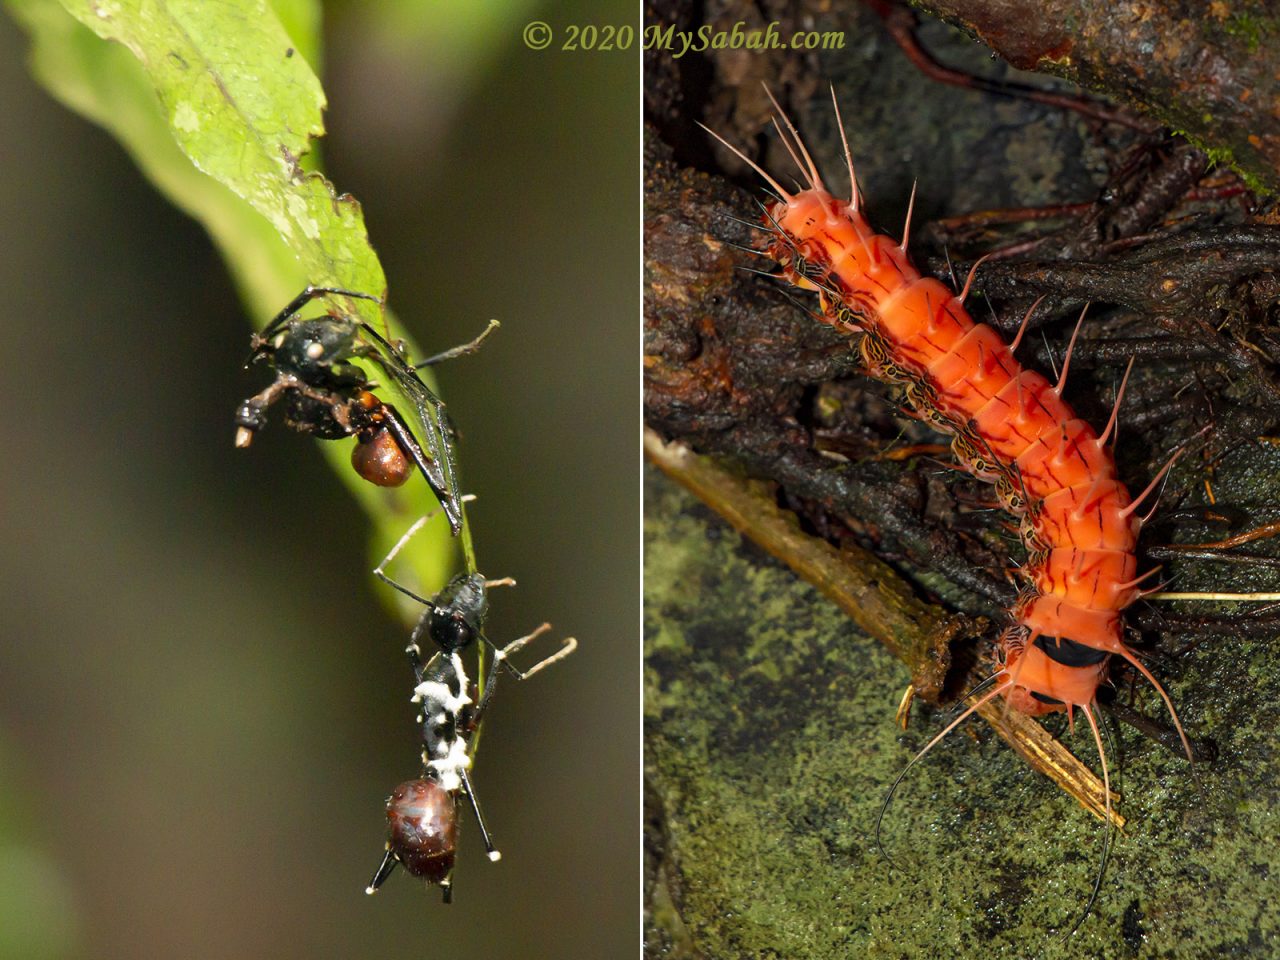 Left: zombie forest ants infected by parasitic fungus (commonly known as Cordyceps). Right: big caterpillar